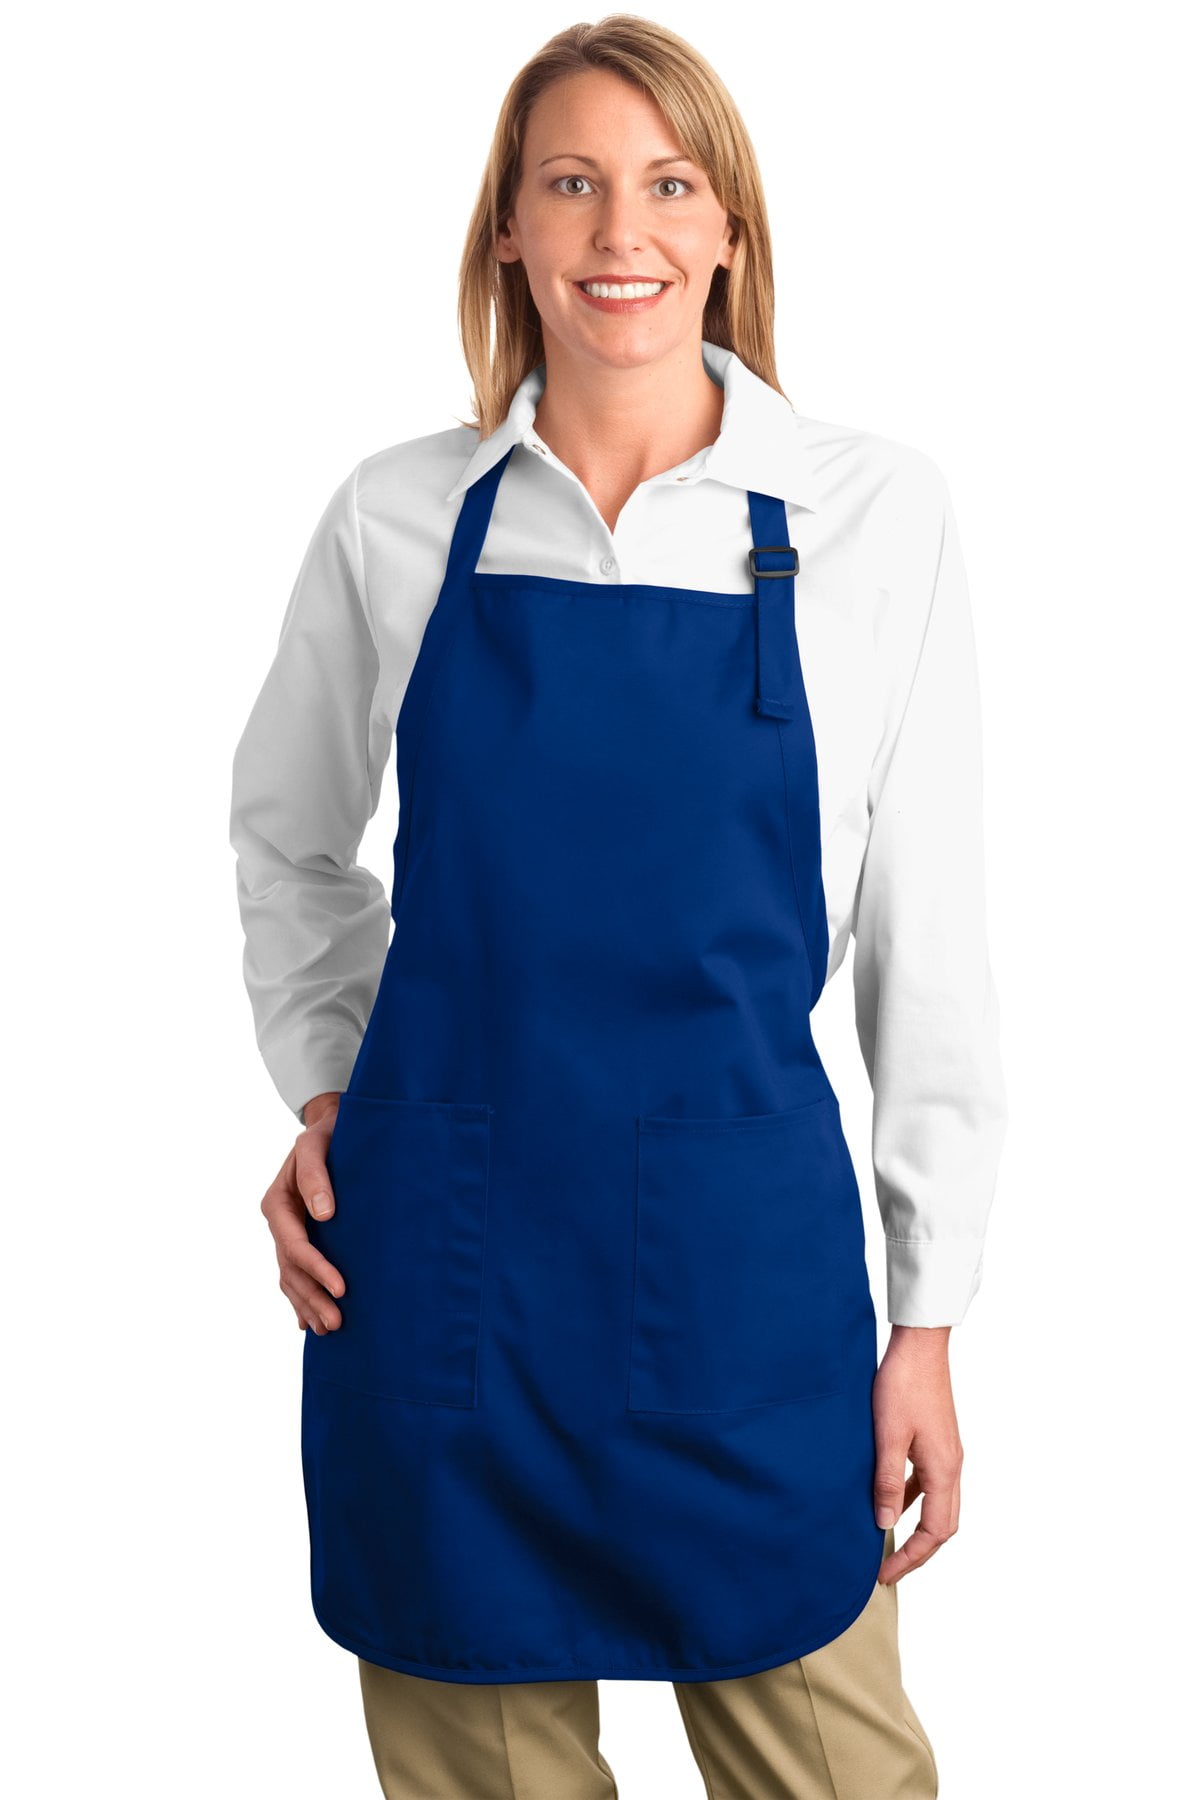 ADULT STAIN RELEASE TWO POCKETS ADJUSTABLE 1" WIDE STRAPS FULL LENGTH APRON 